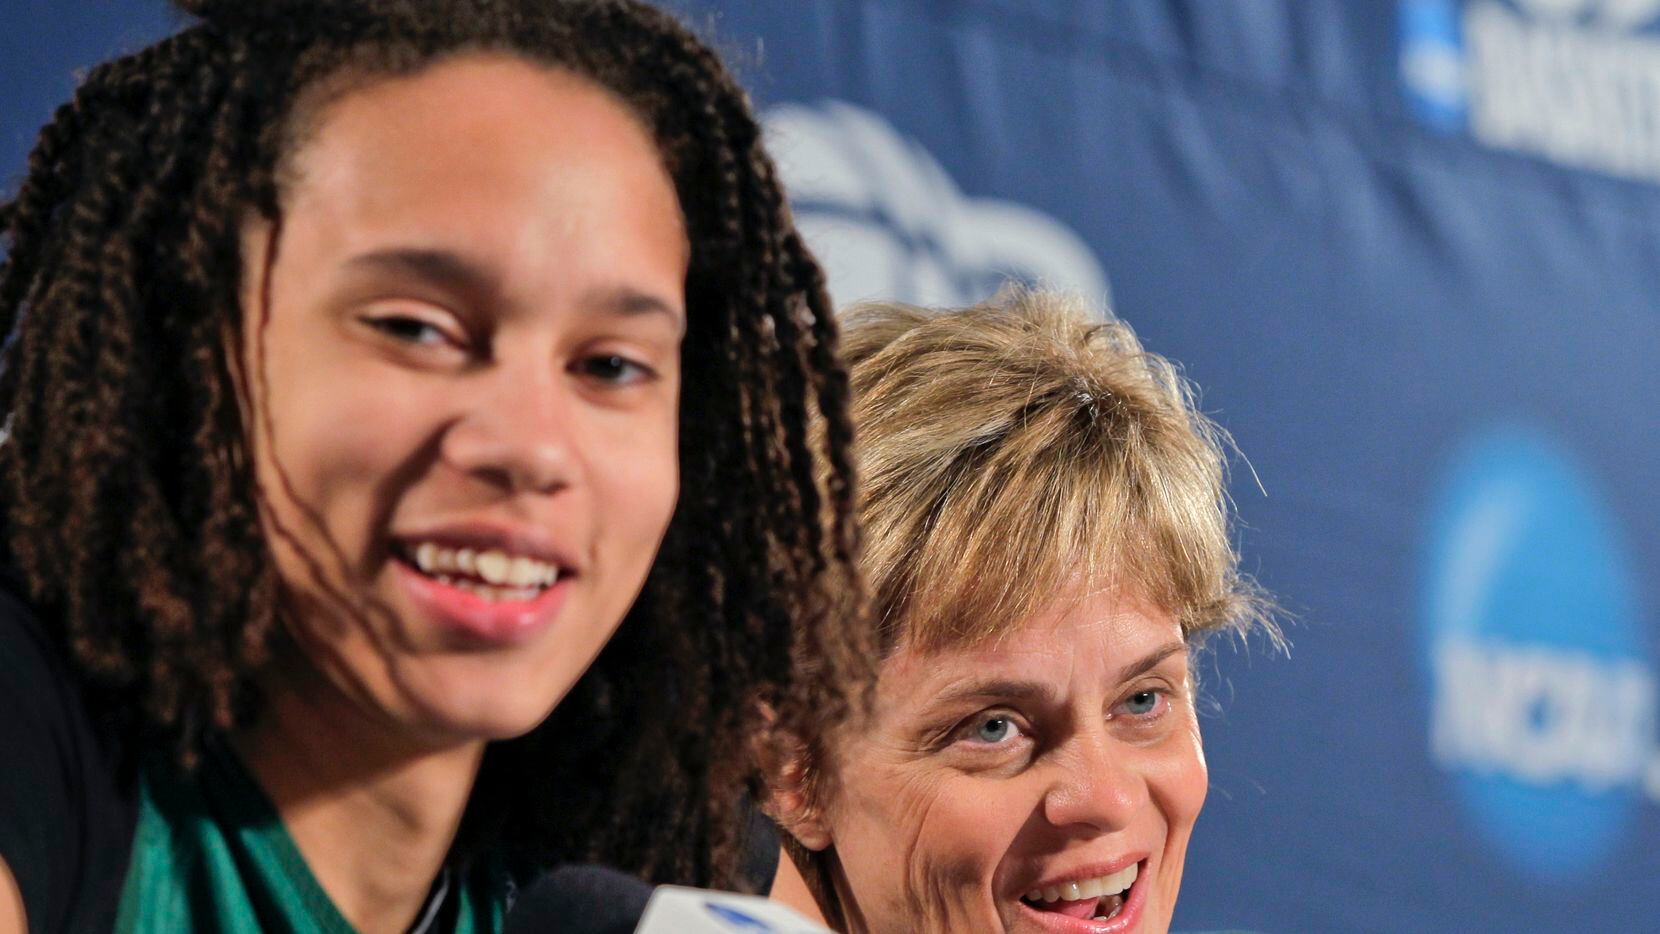 Baylor coach Kim Mulkey, right, and Brittney Griner discuss dunking, during a news...